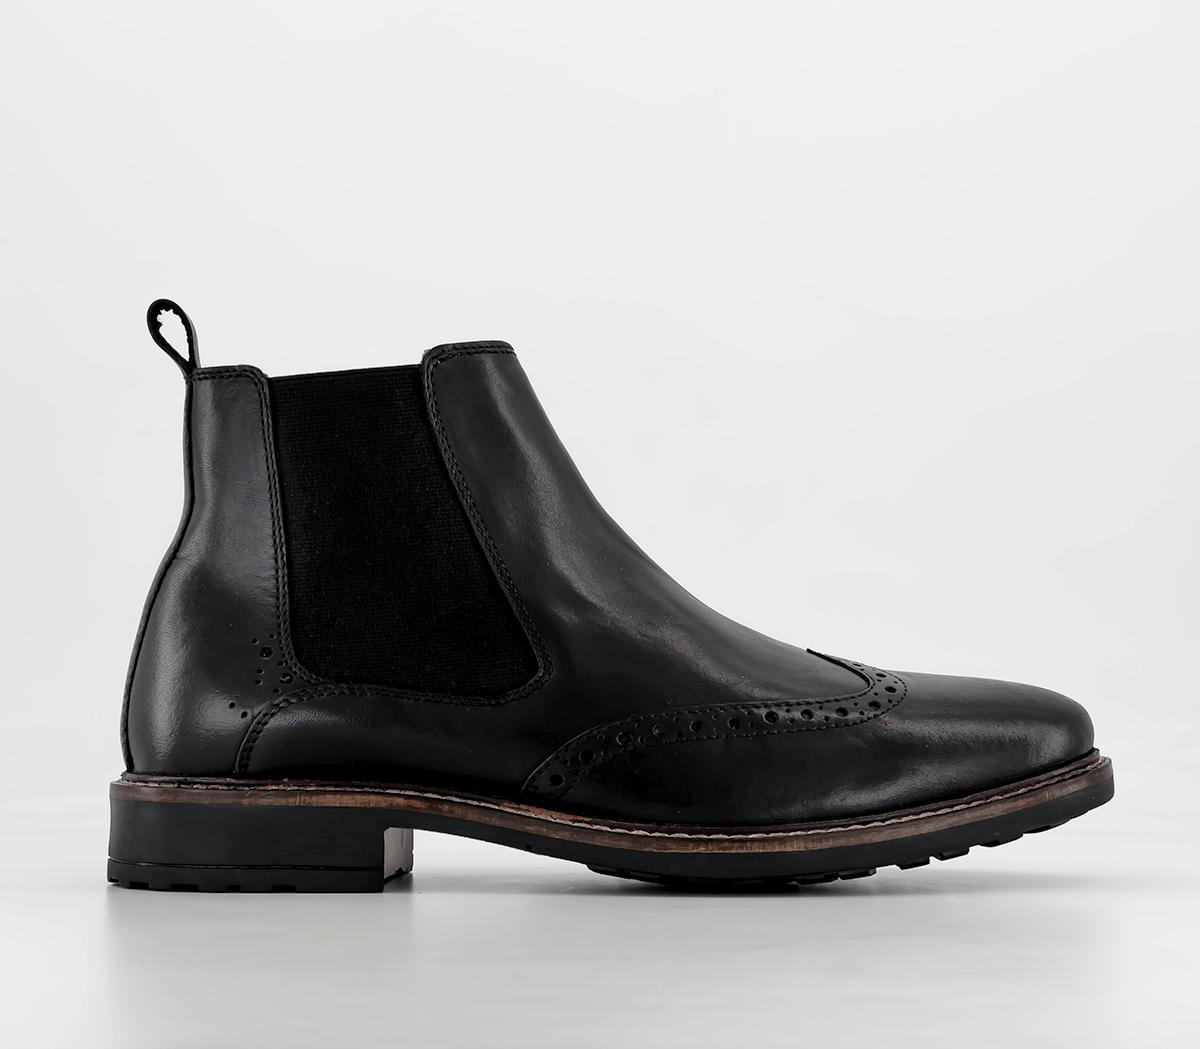 OFFICE Bromley Brogue Black Leather - Men's Boots